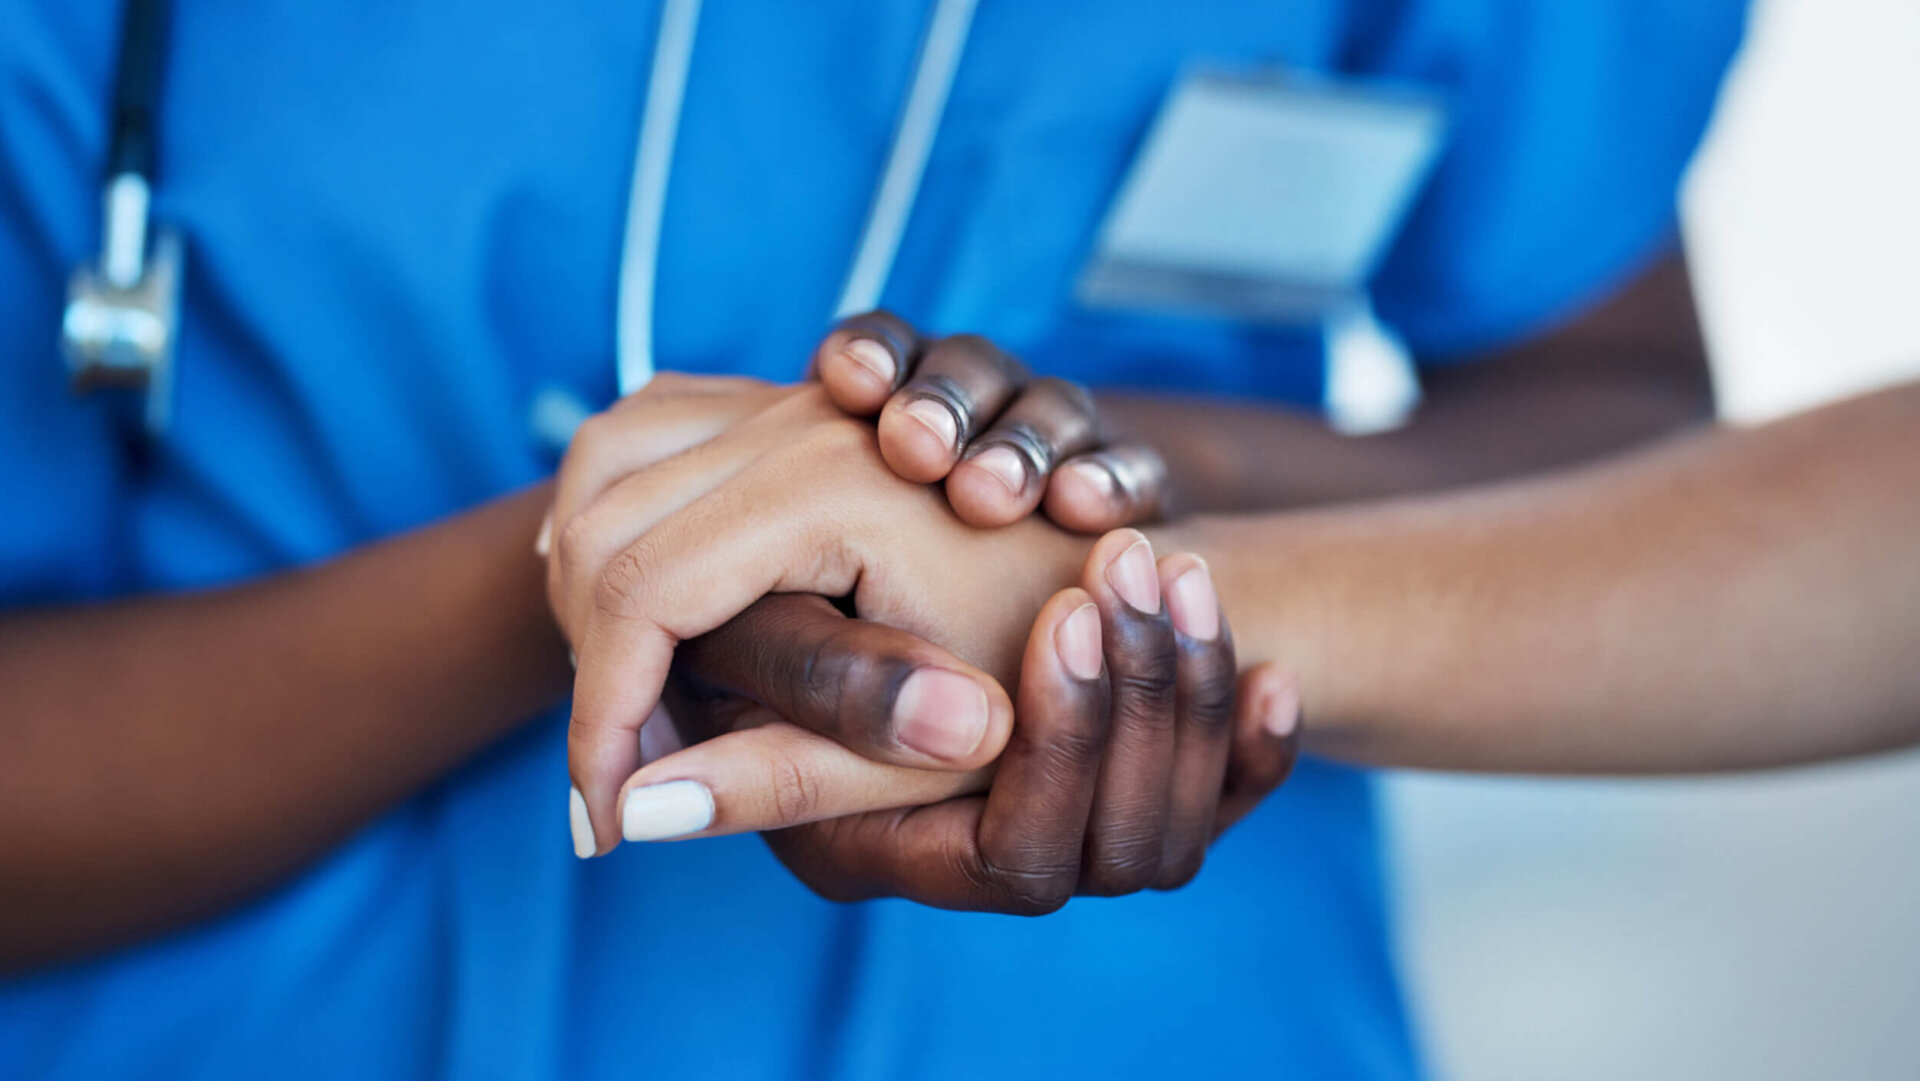 Closeup shot of a nurse holding a patient's hand in comfort